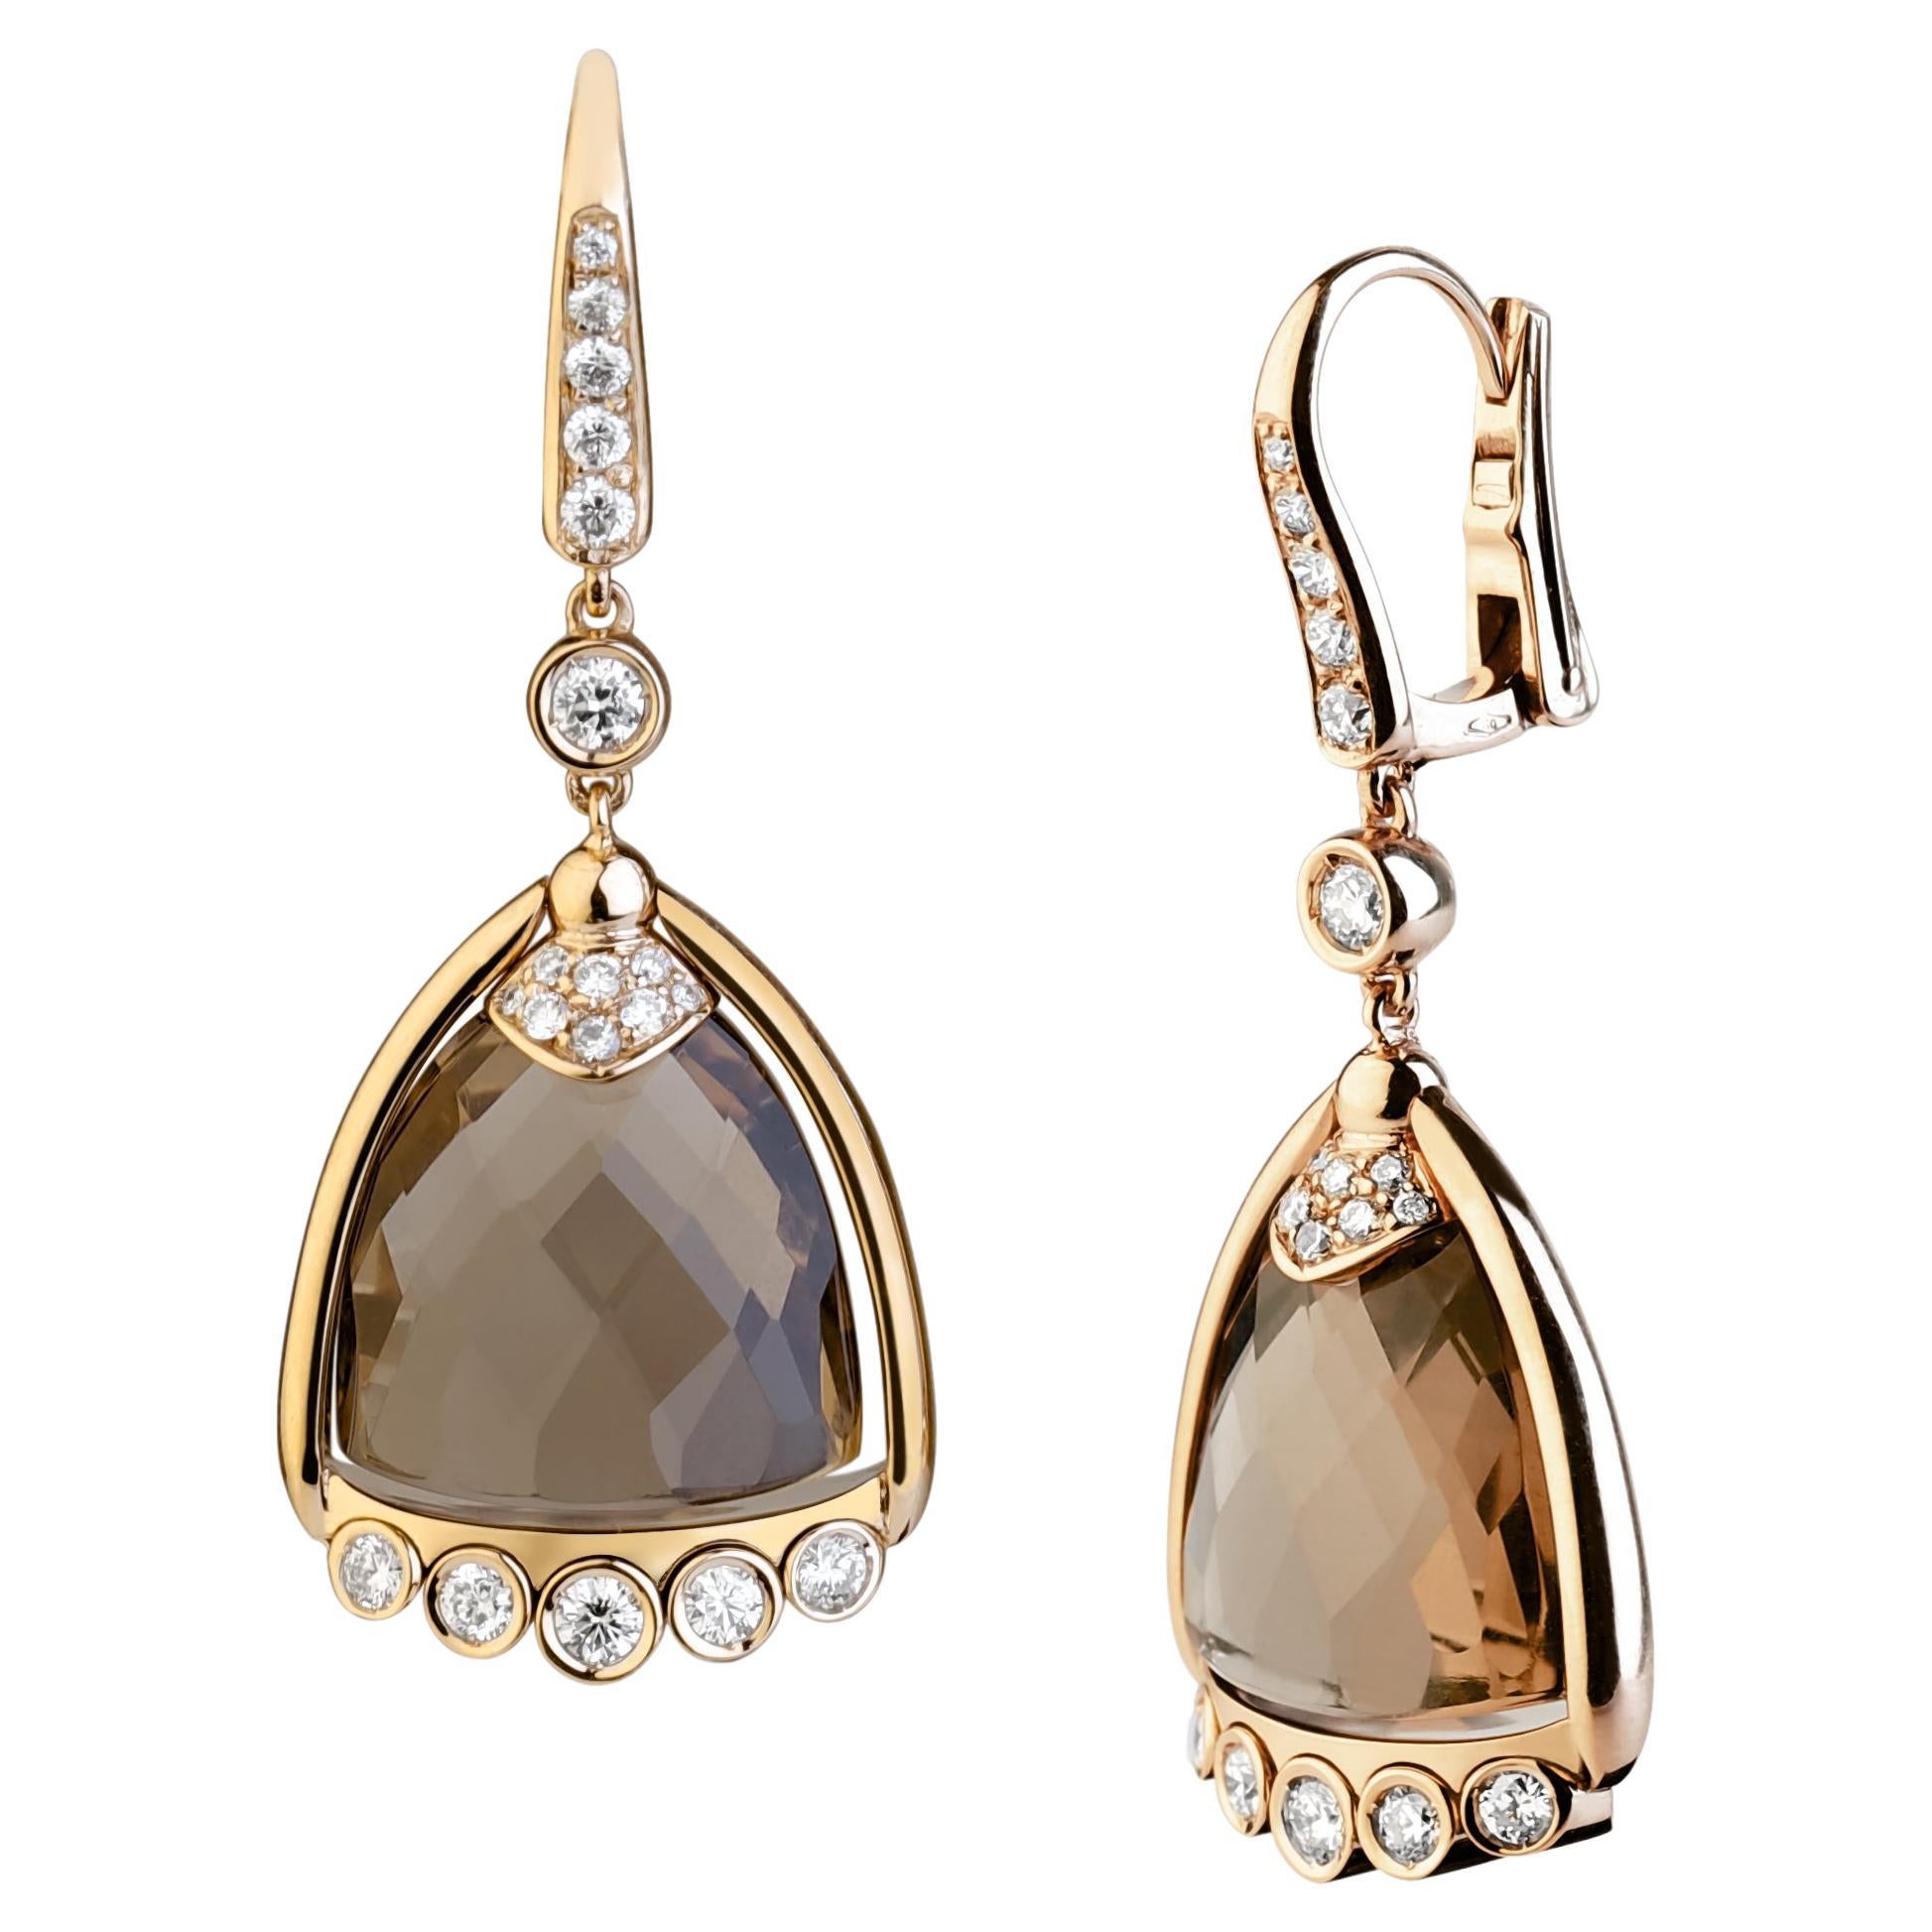 Bell Collection by Angeletti, Gold Earrings with Smoky Quartz and Diamonds